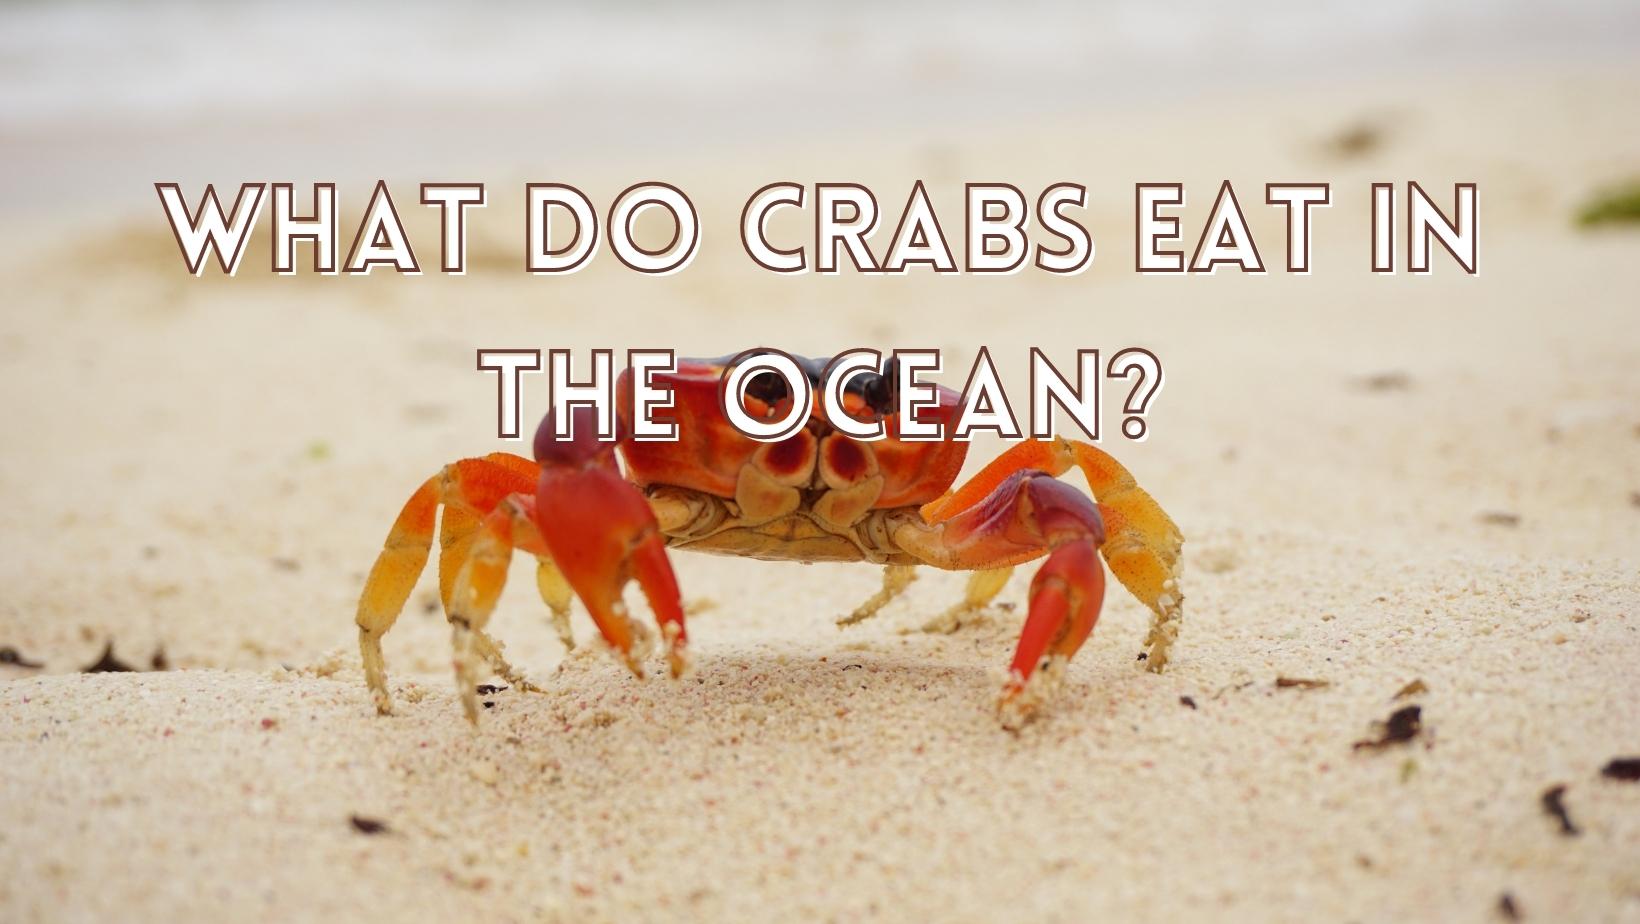 Facts about crabs